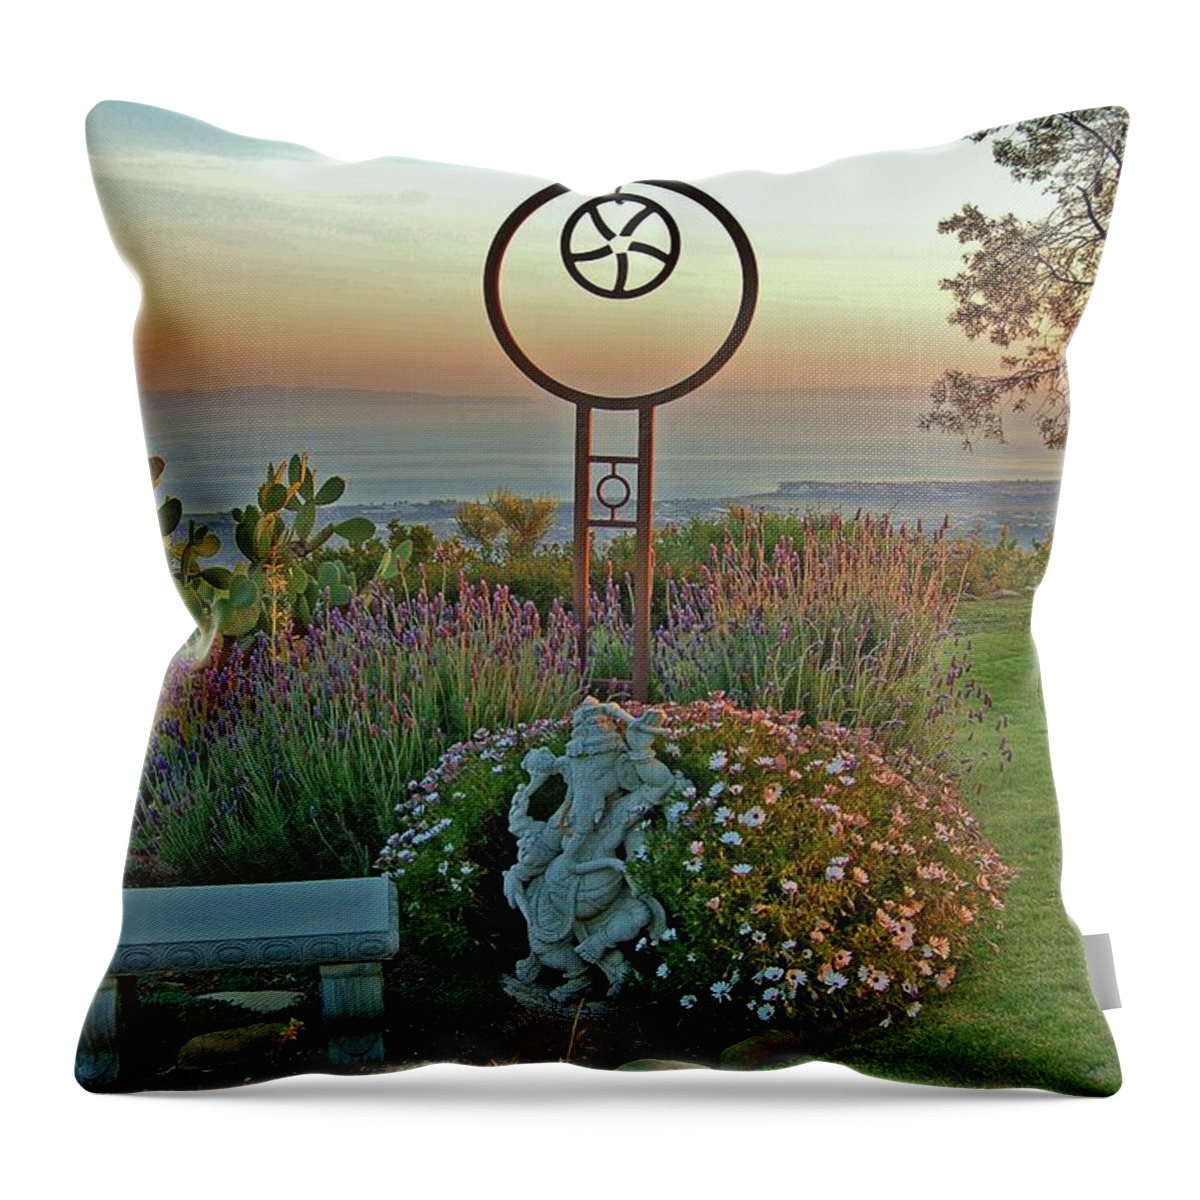 Golden Hour Throw Pillow featuring the photograph Meditation Spot by Linda Brody